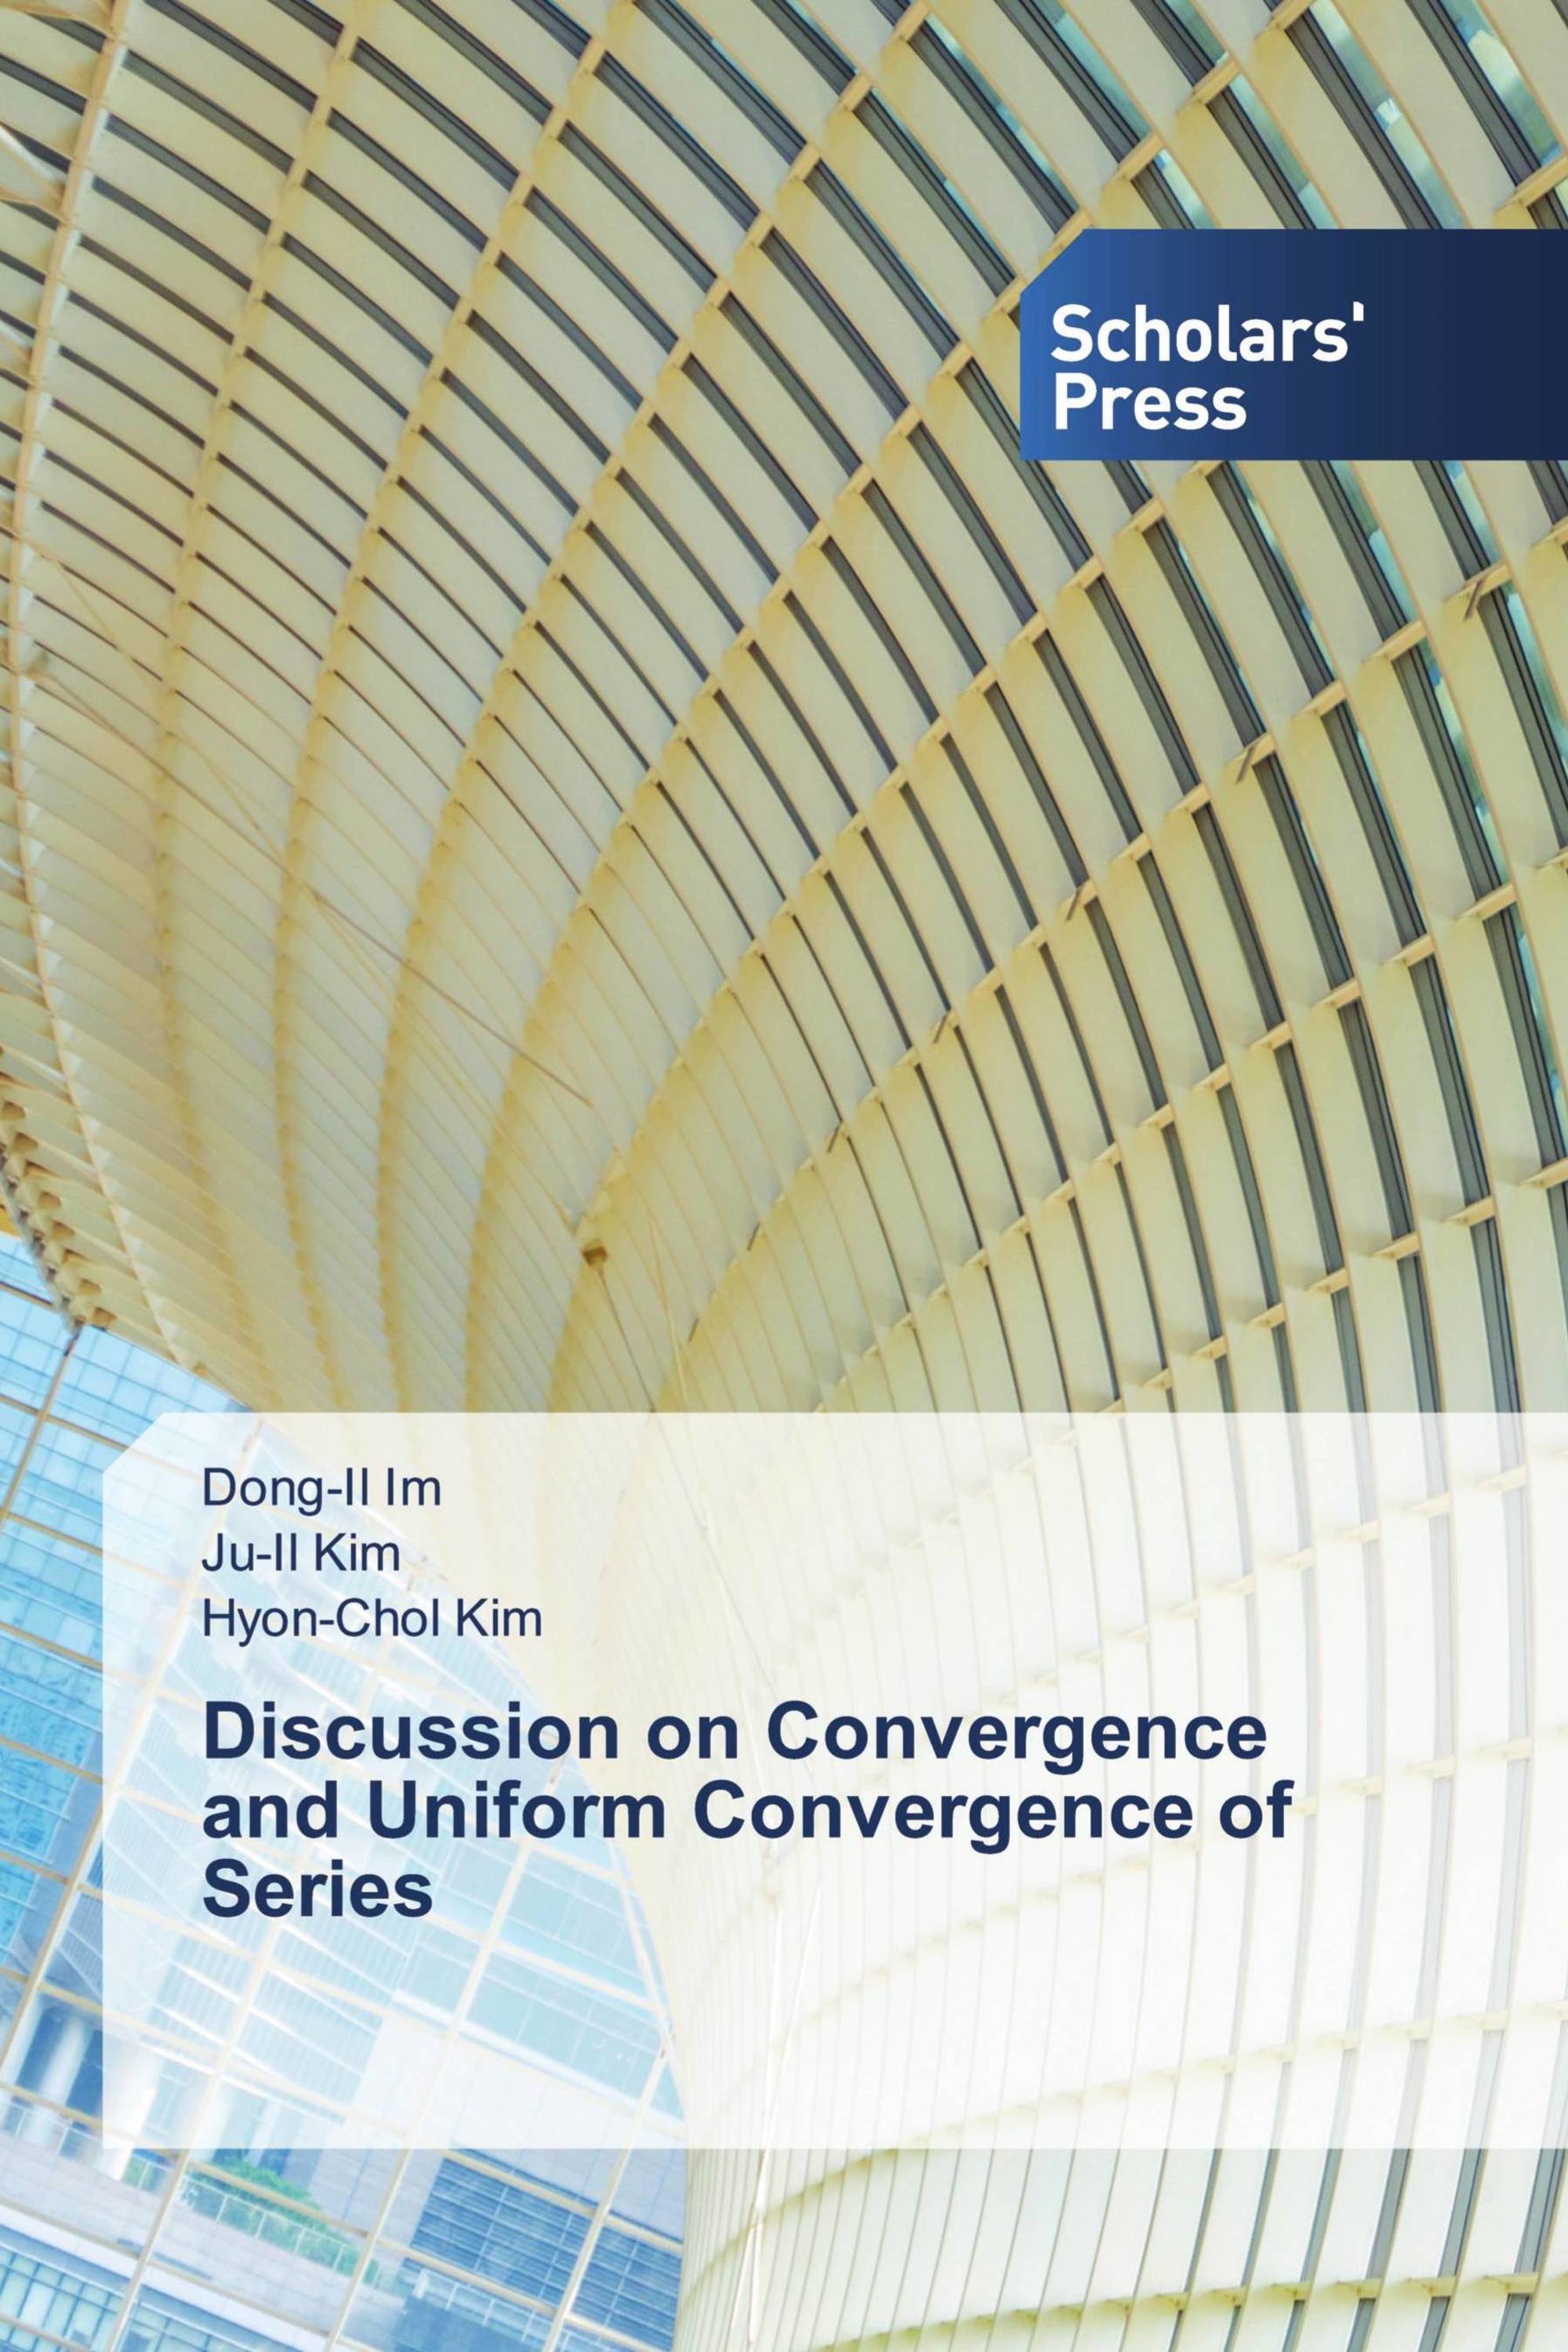 Discussion on Convergence and Uniform Convergence of Series